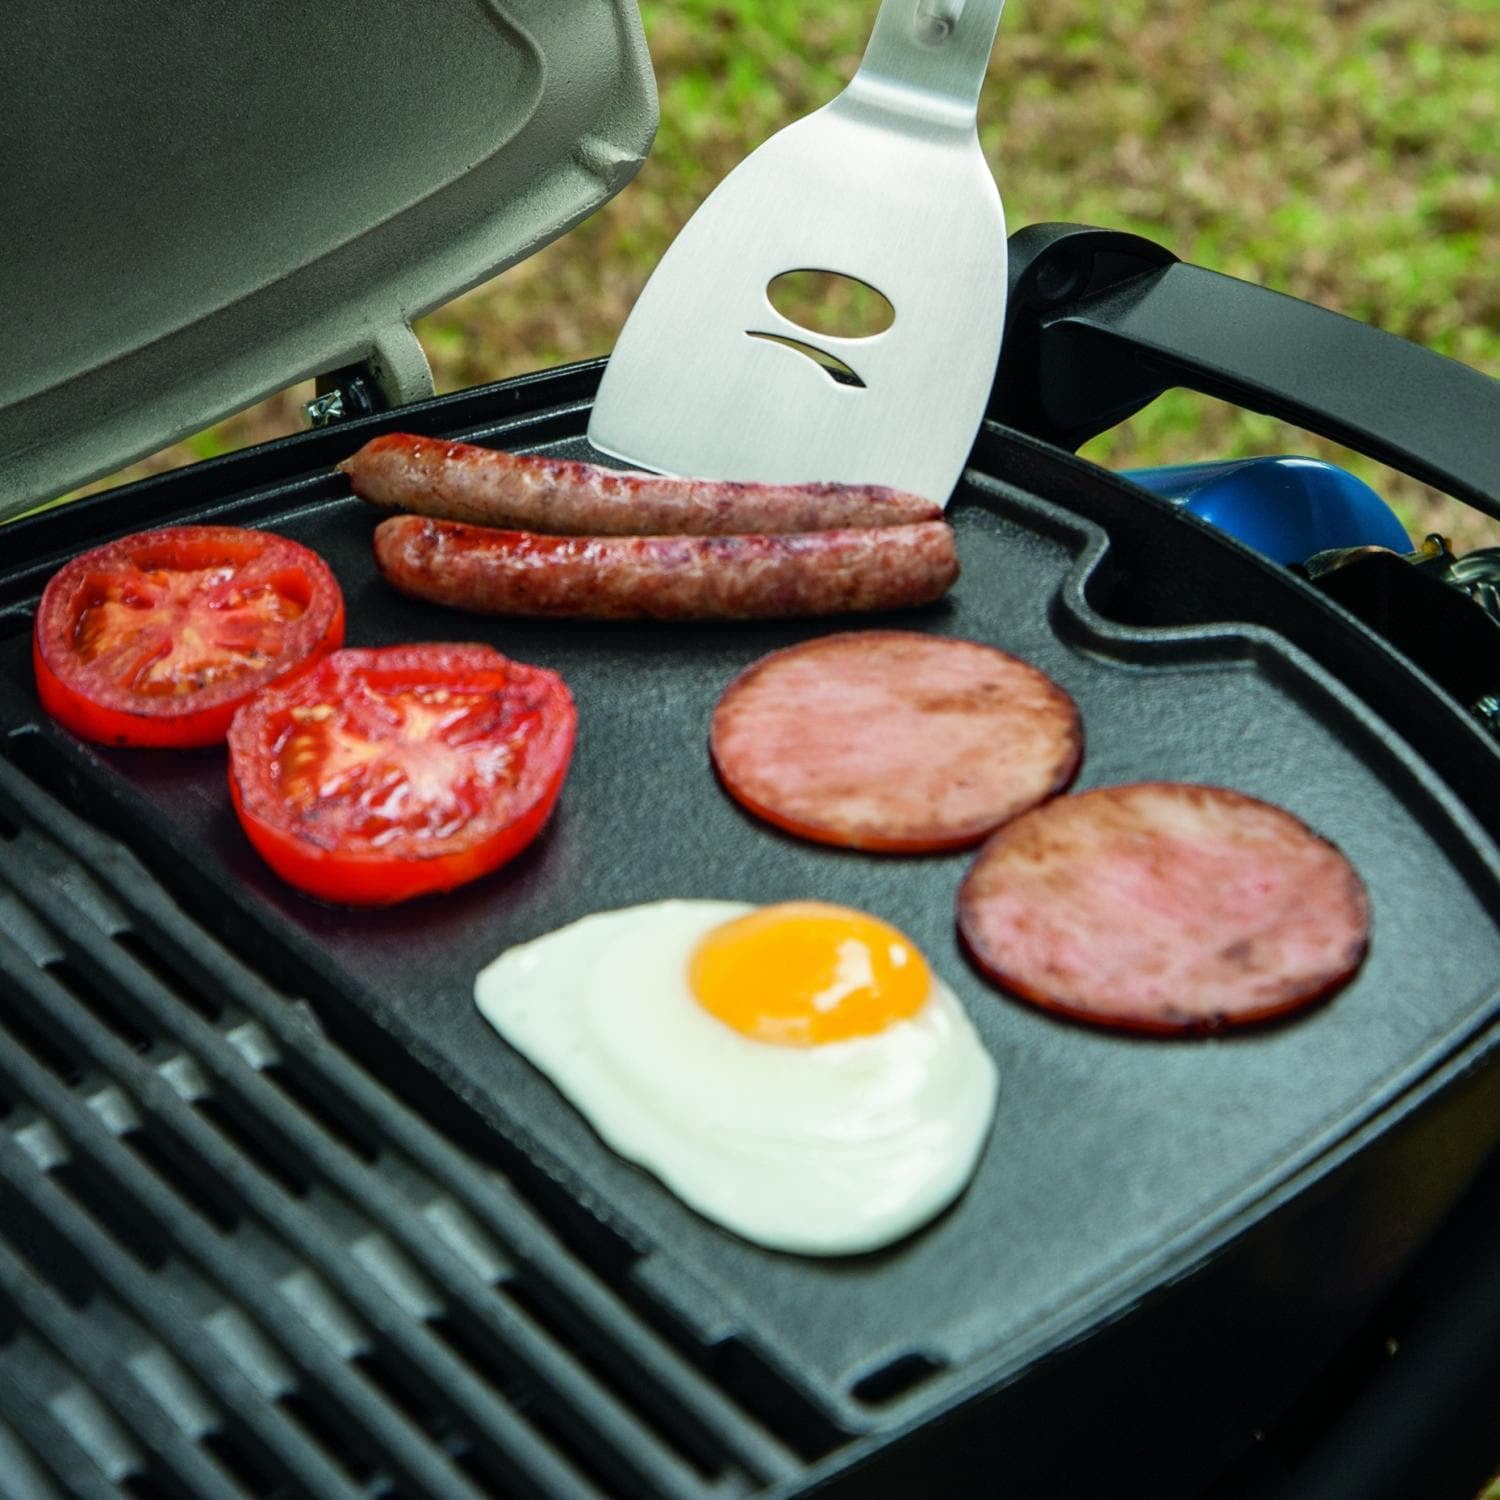 Weber Griddle flat-top grill series offers fast cooking and